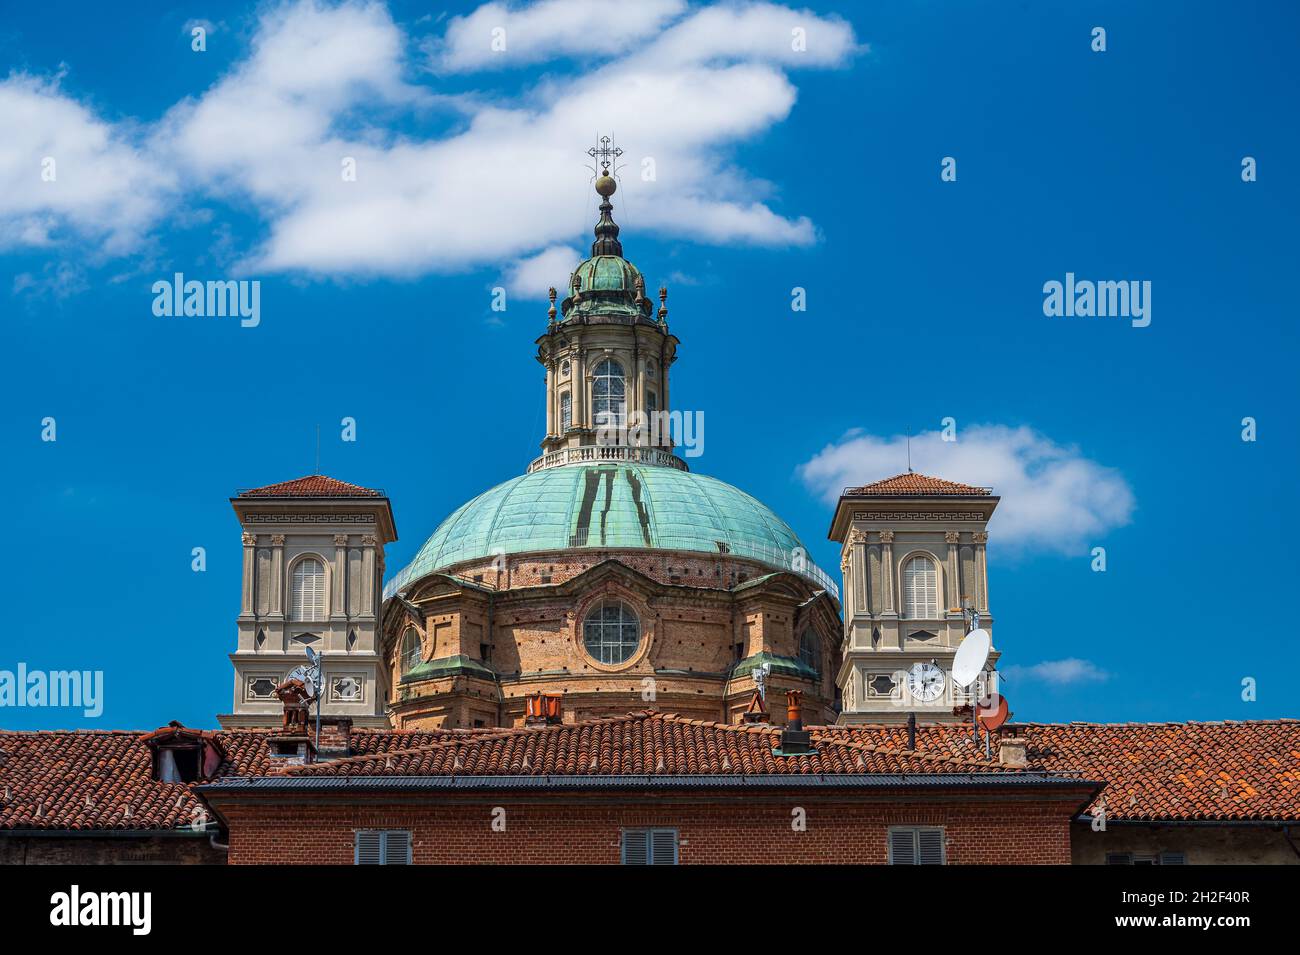 The Santuario Regina Montis Regalis is a monumental church located in Vicoforte, Piedmont, Italy. It is known for having the largest elliptical cupola Stock Photo